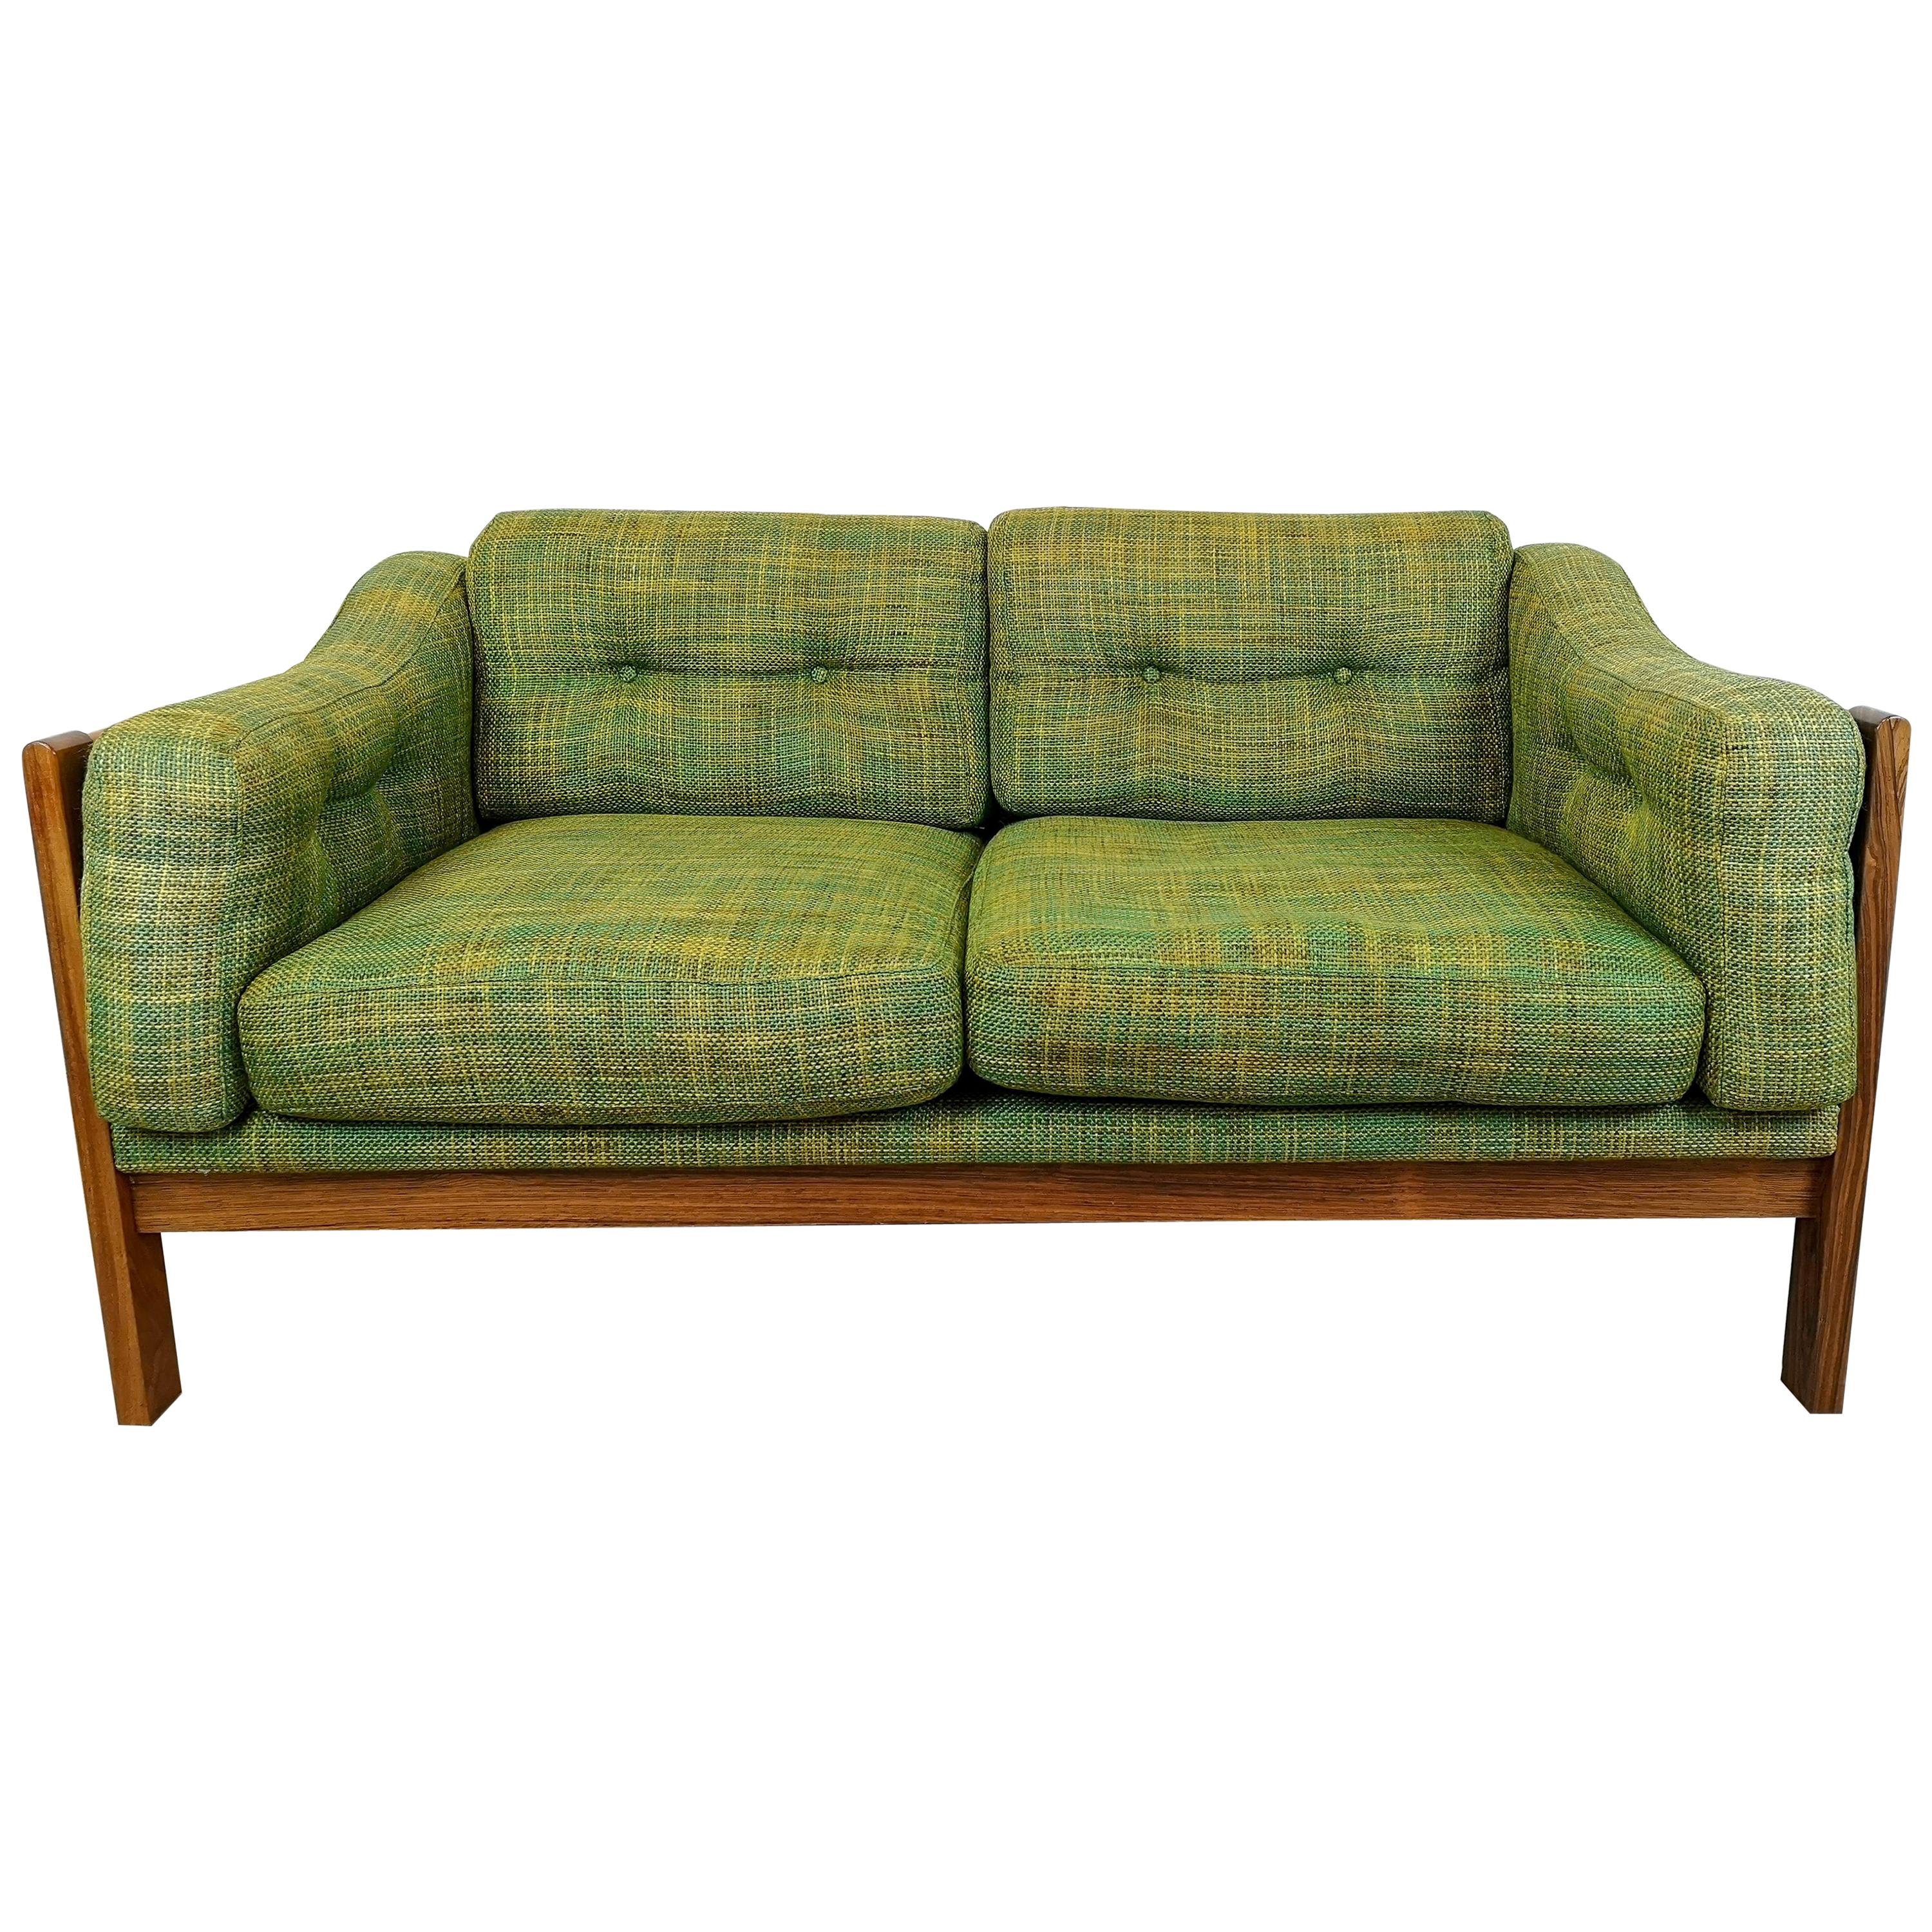 Midcentury Rosewood and Green Cushions Sofa "Monte Carlo", Sweden, 1960s